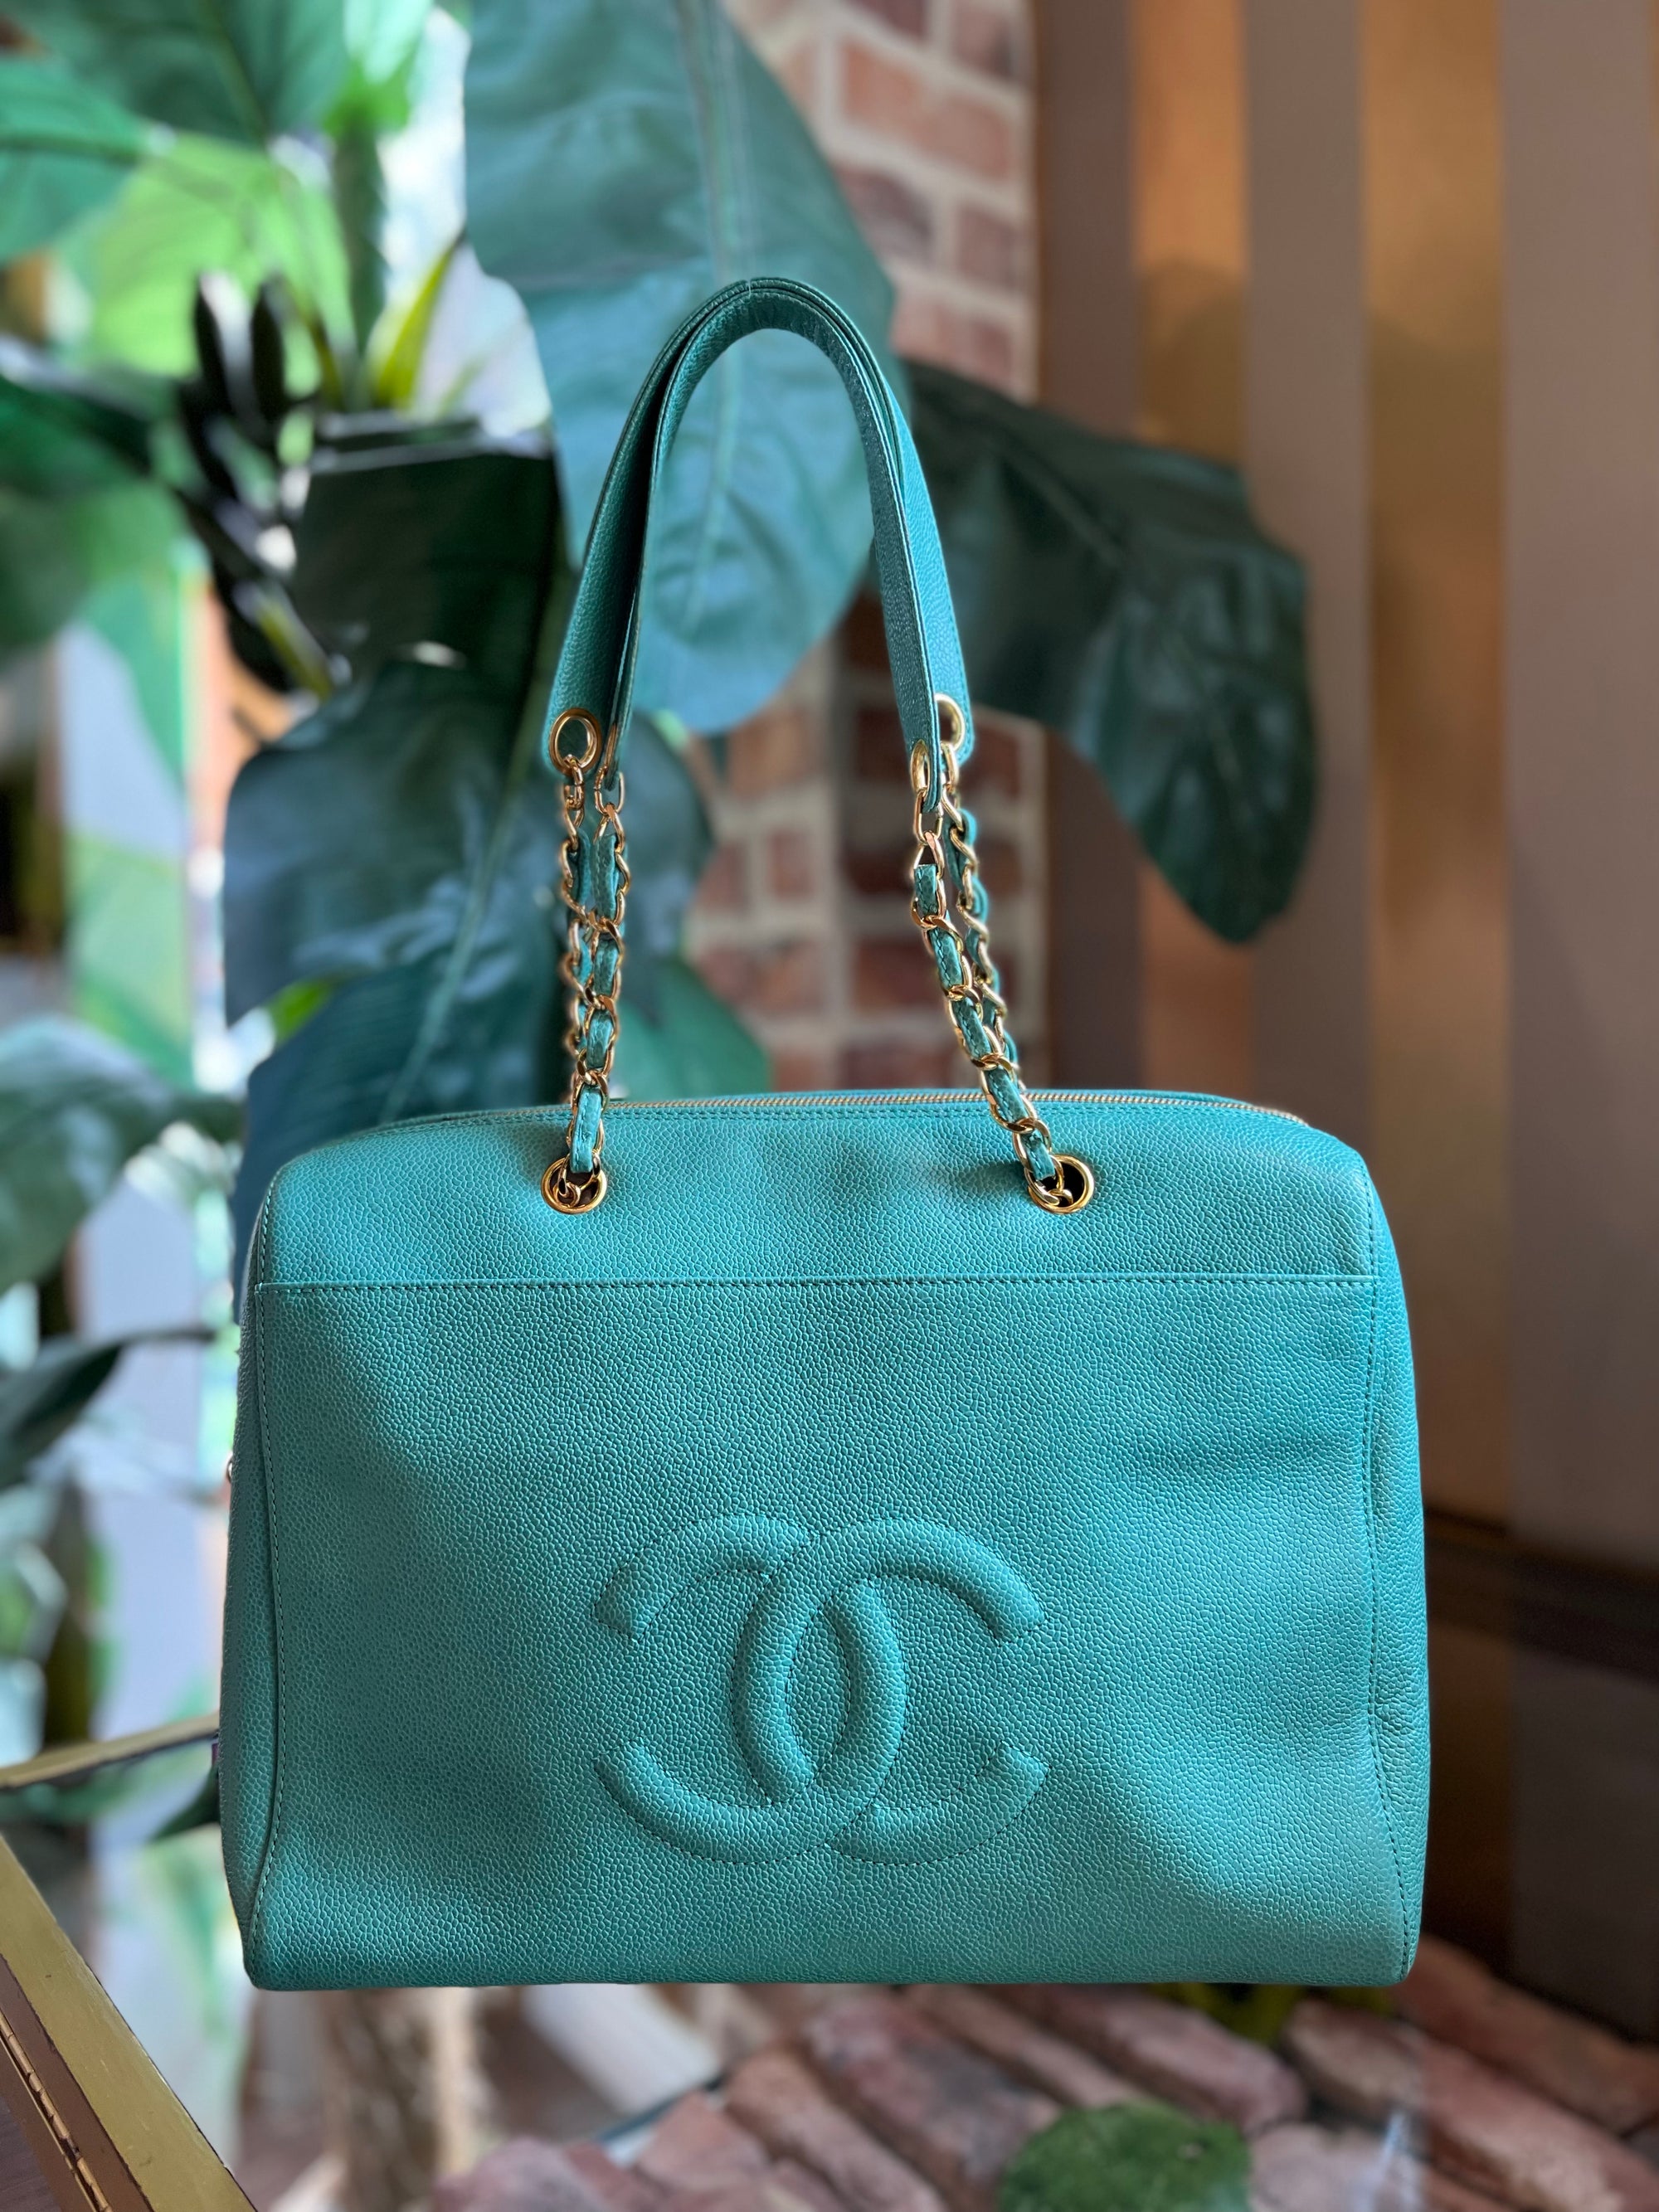 CHANEL Teal Caviar Leather Timeless Medium Zip Tote